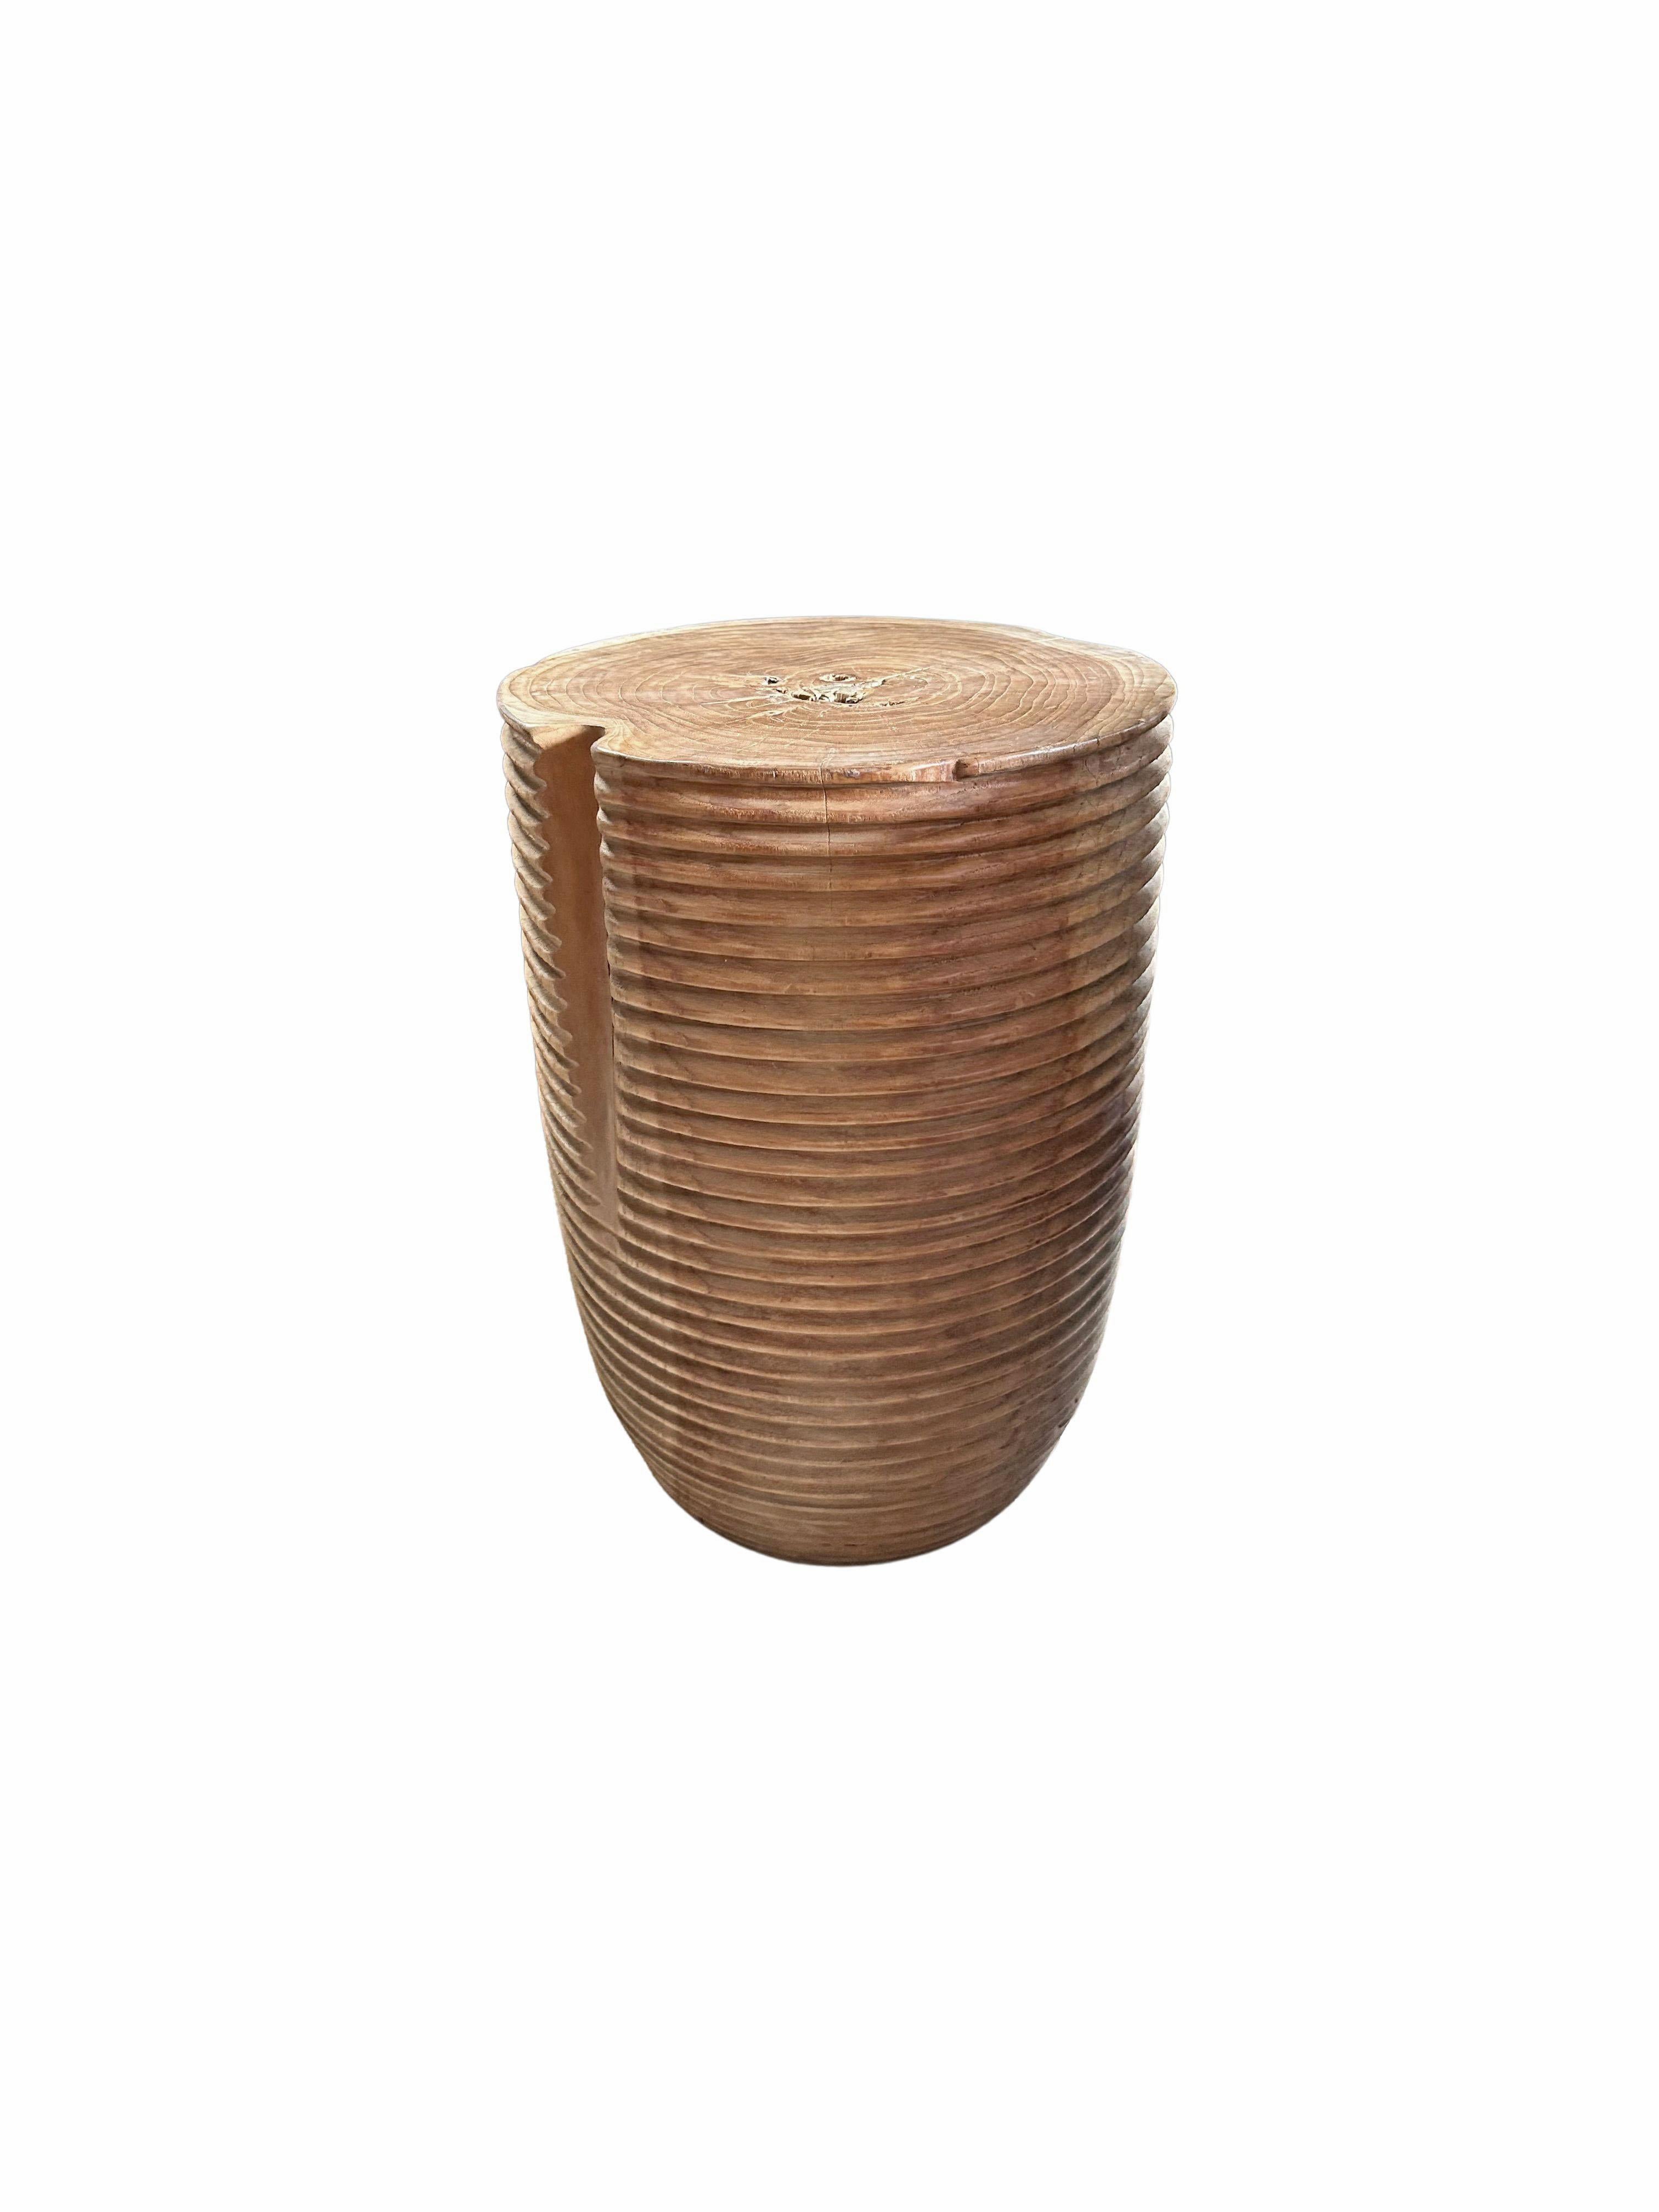 Hand-Crafted Round Teak Wood Side Table, Carved Detailing, Modern Organic For Sale